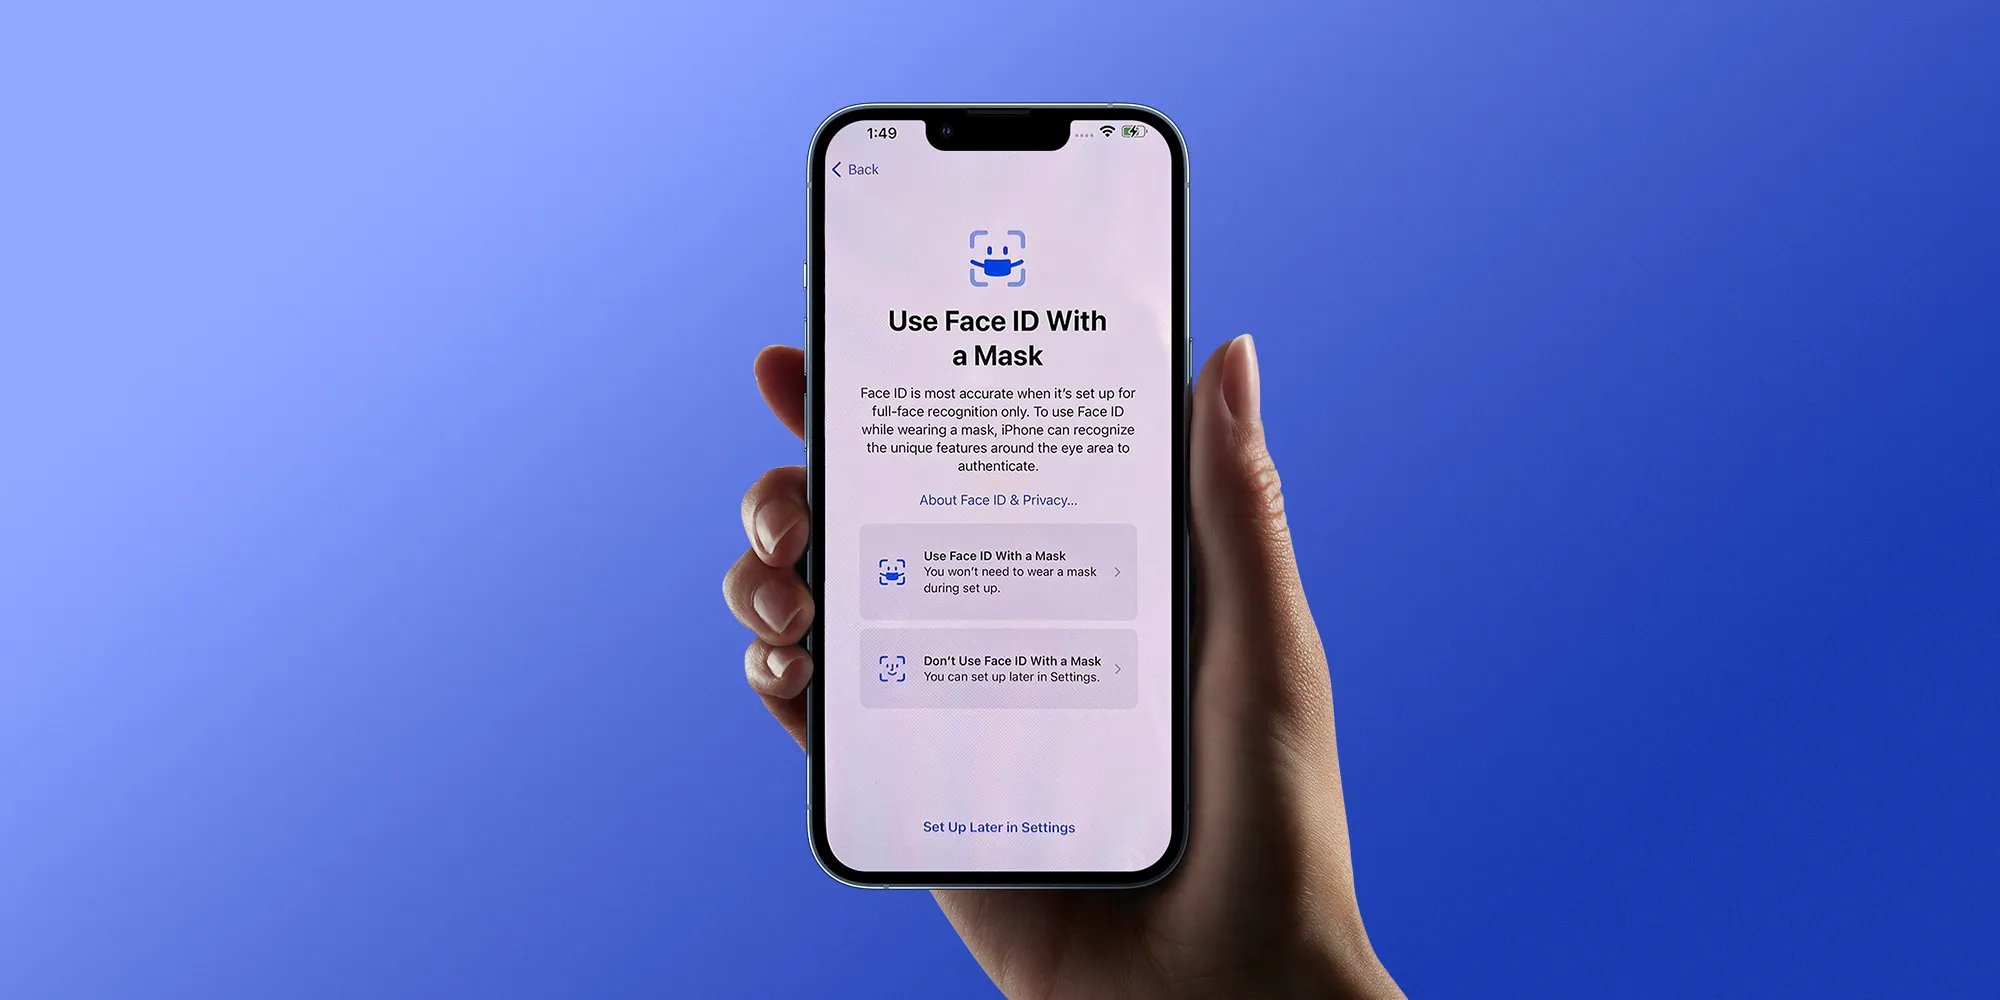 ios-15-4-beta-lets-you-unlock-your-iphone-with-face-id-while-wearing-a-mask